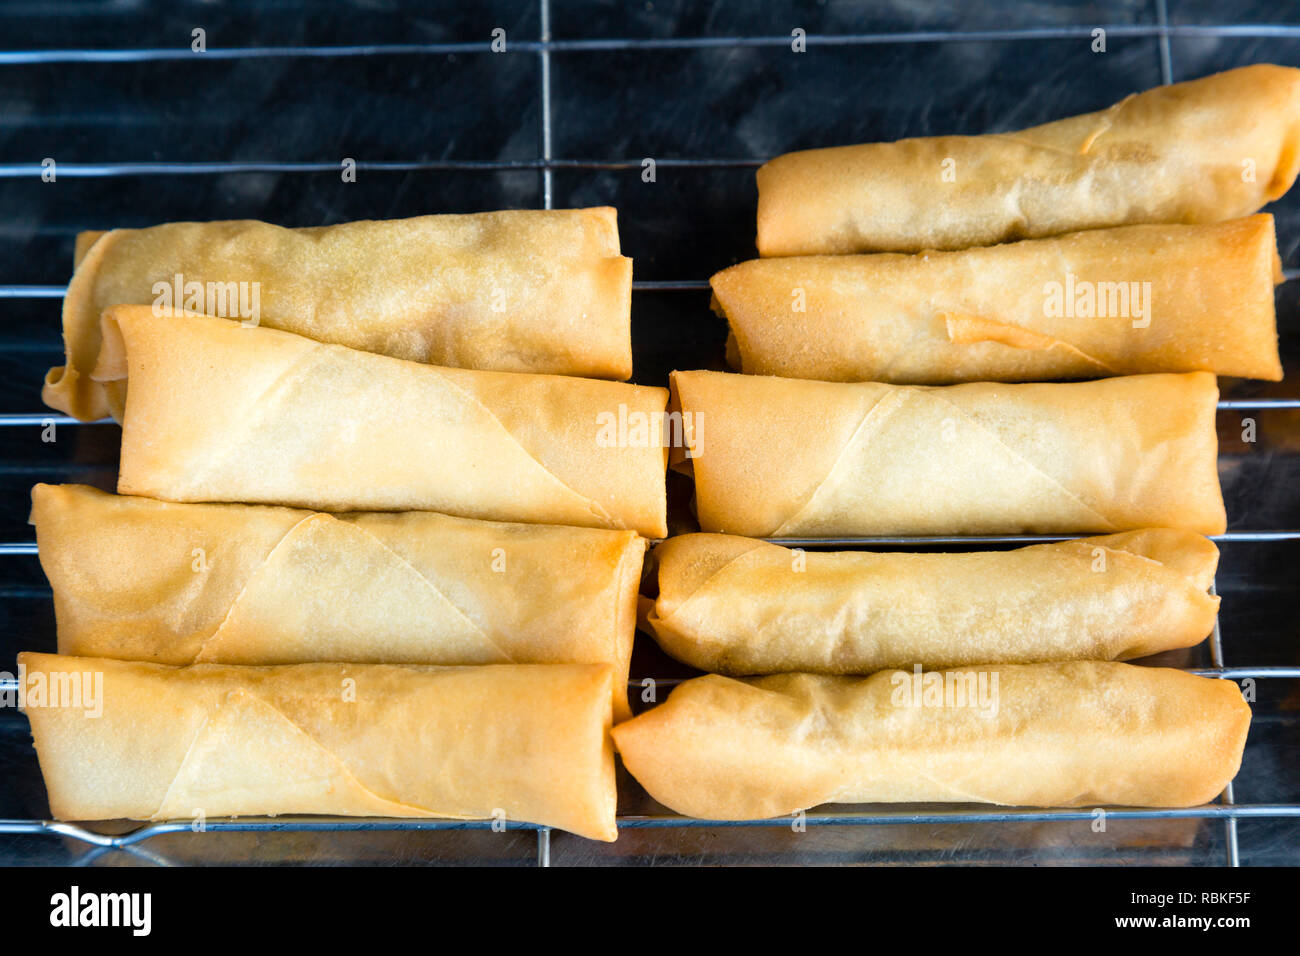 Spring rolls also known as popiah are a large variety of filled, rolled appetizers or dim sum found in East Asian, South Asian, and Southeast Asian cu Stock Photo